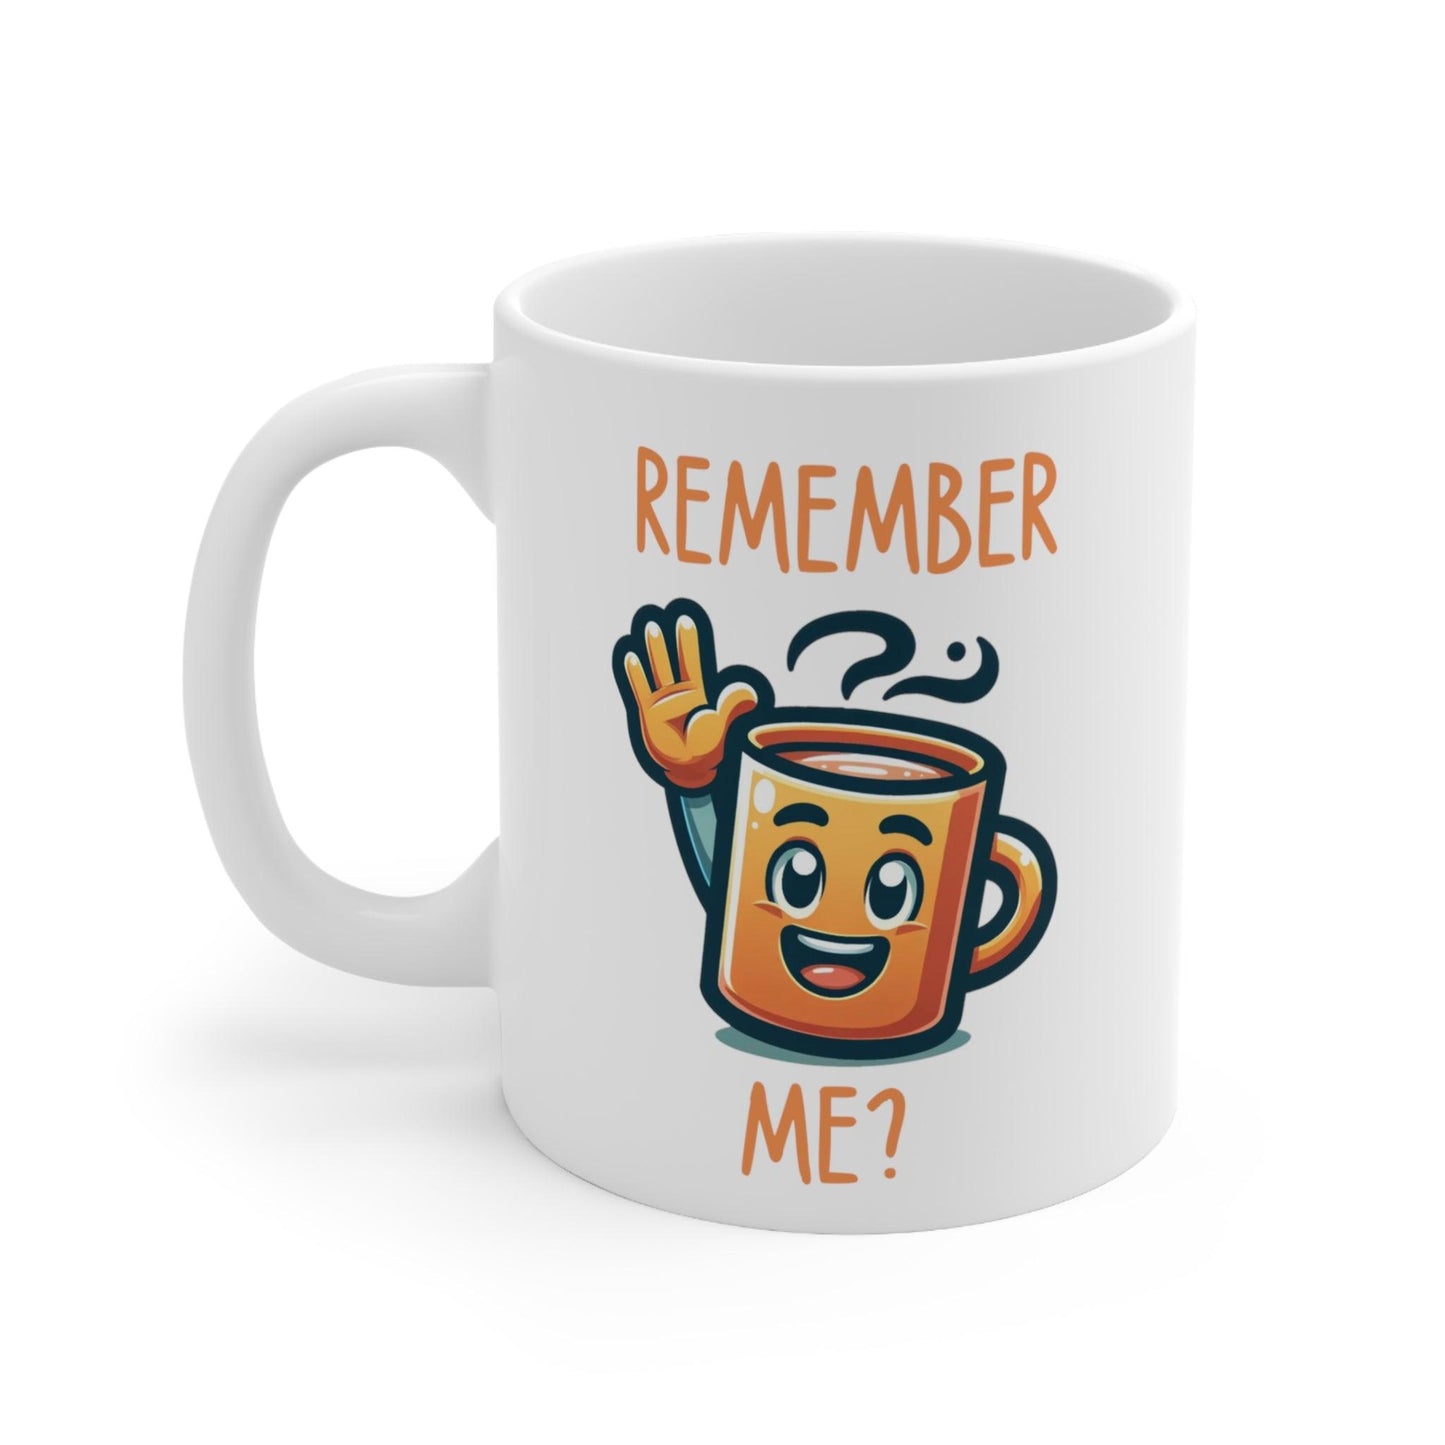 Forget-Me-Not Reminder Mug - Perfect Memory Aid Coffee Cup - Fidget and Focus